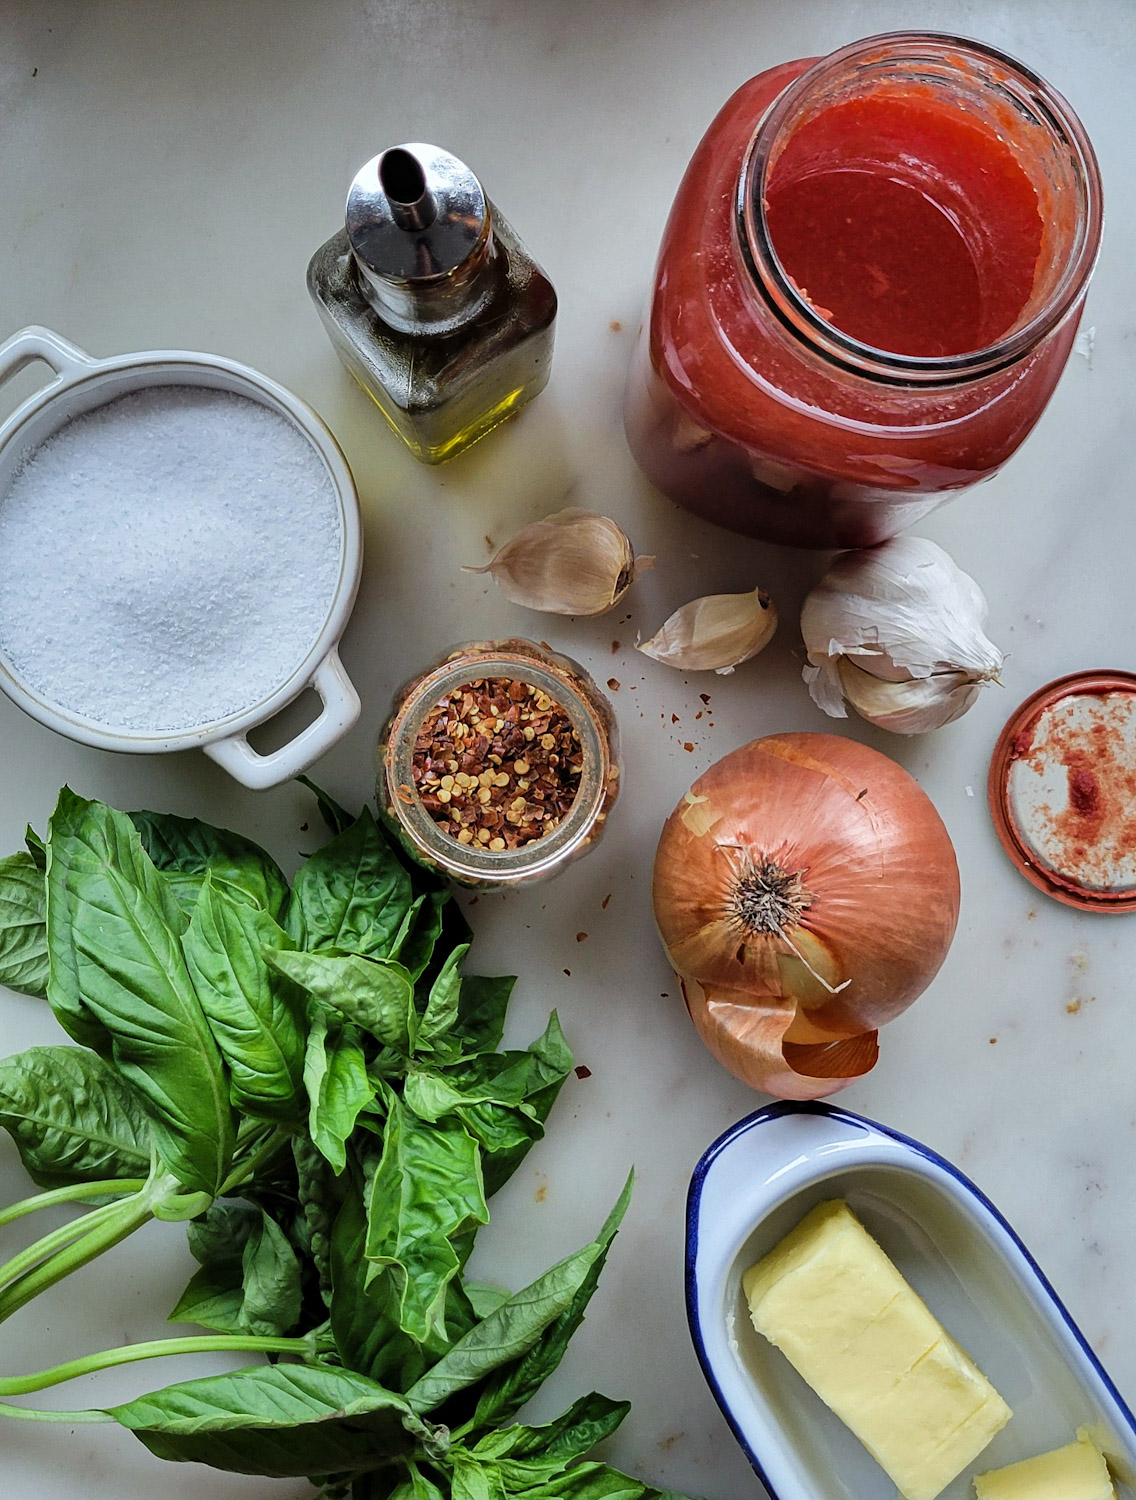 Ingredients needed to make Basil and Garlic Infused Tomato Sauce are set out on the counter.